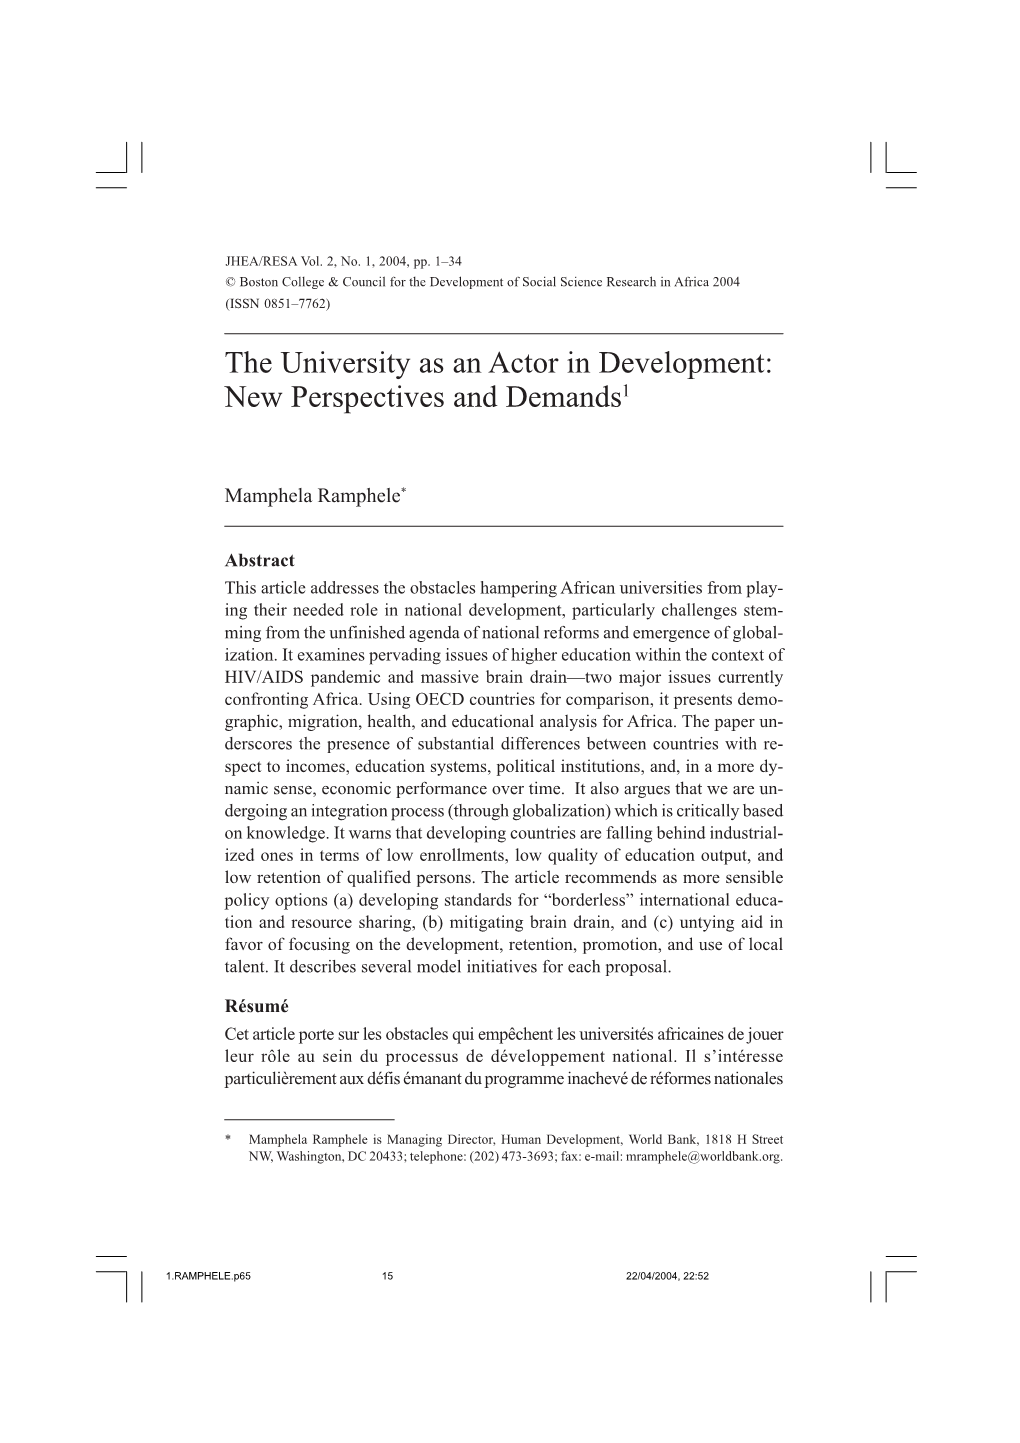 The University As an Actor in Development: New Perspectives and Demands1